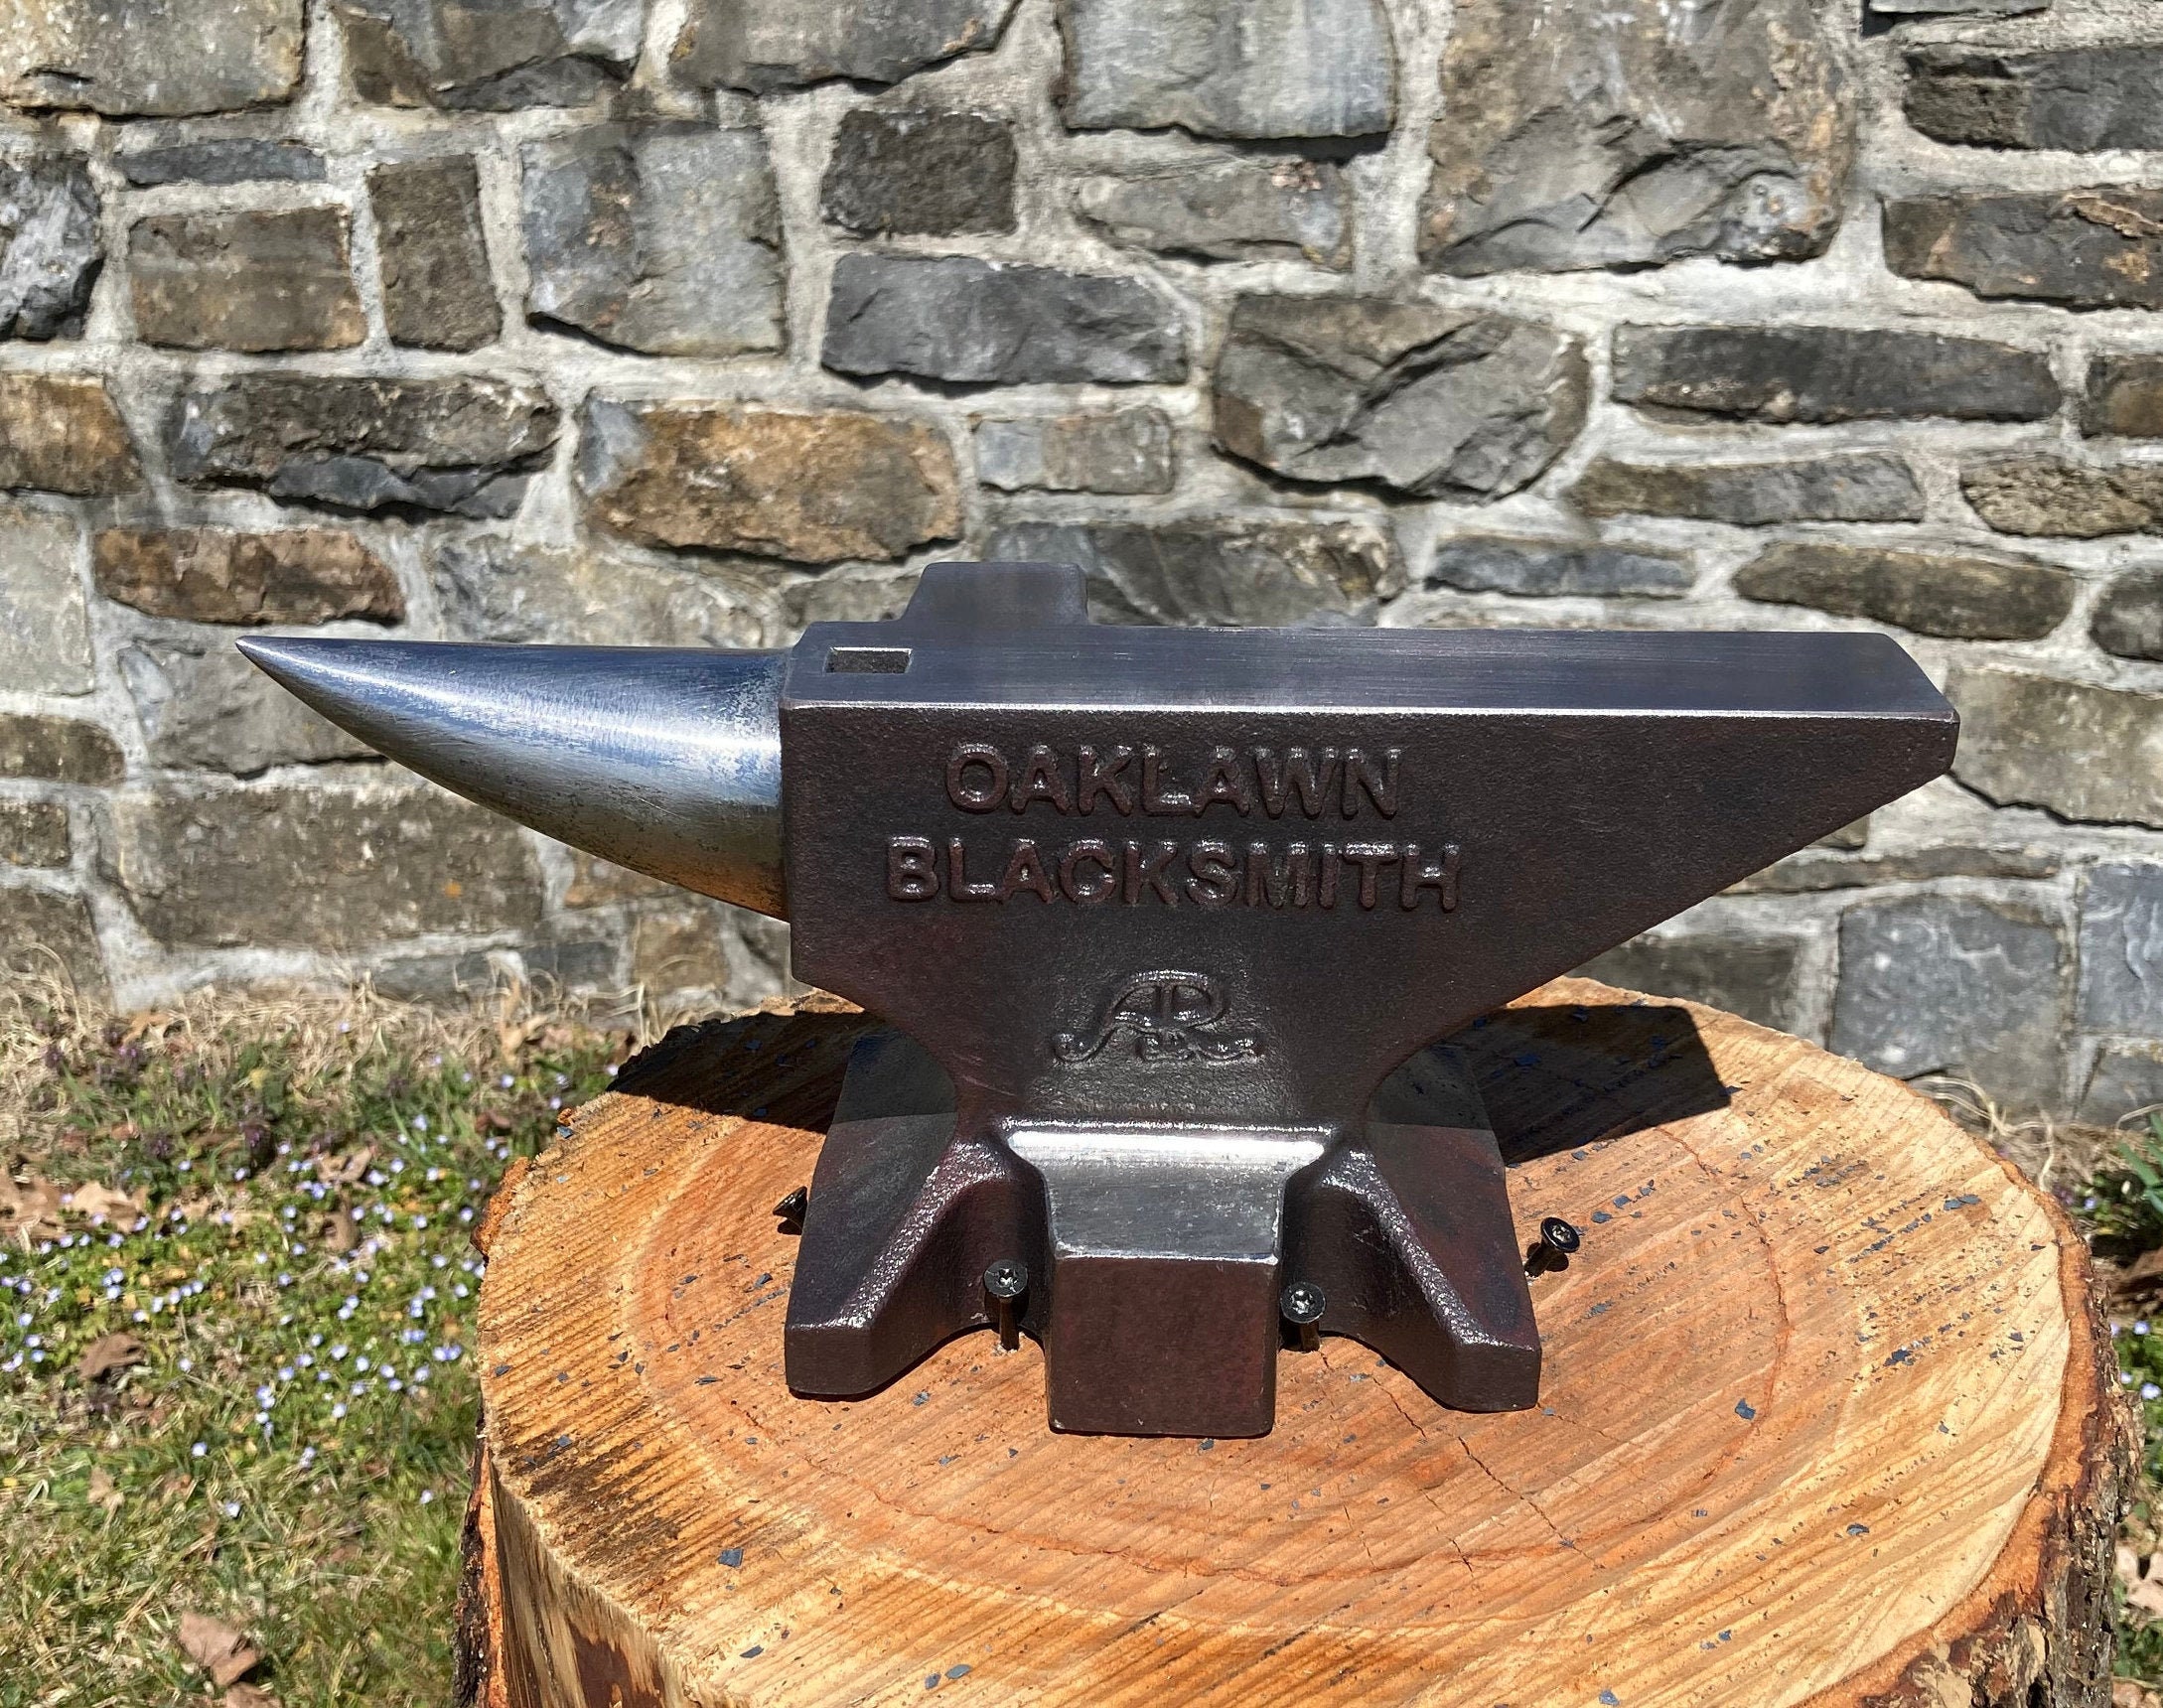 Awesome Blacksmithing Anvil Stand from Oak Log 